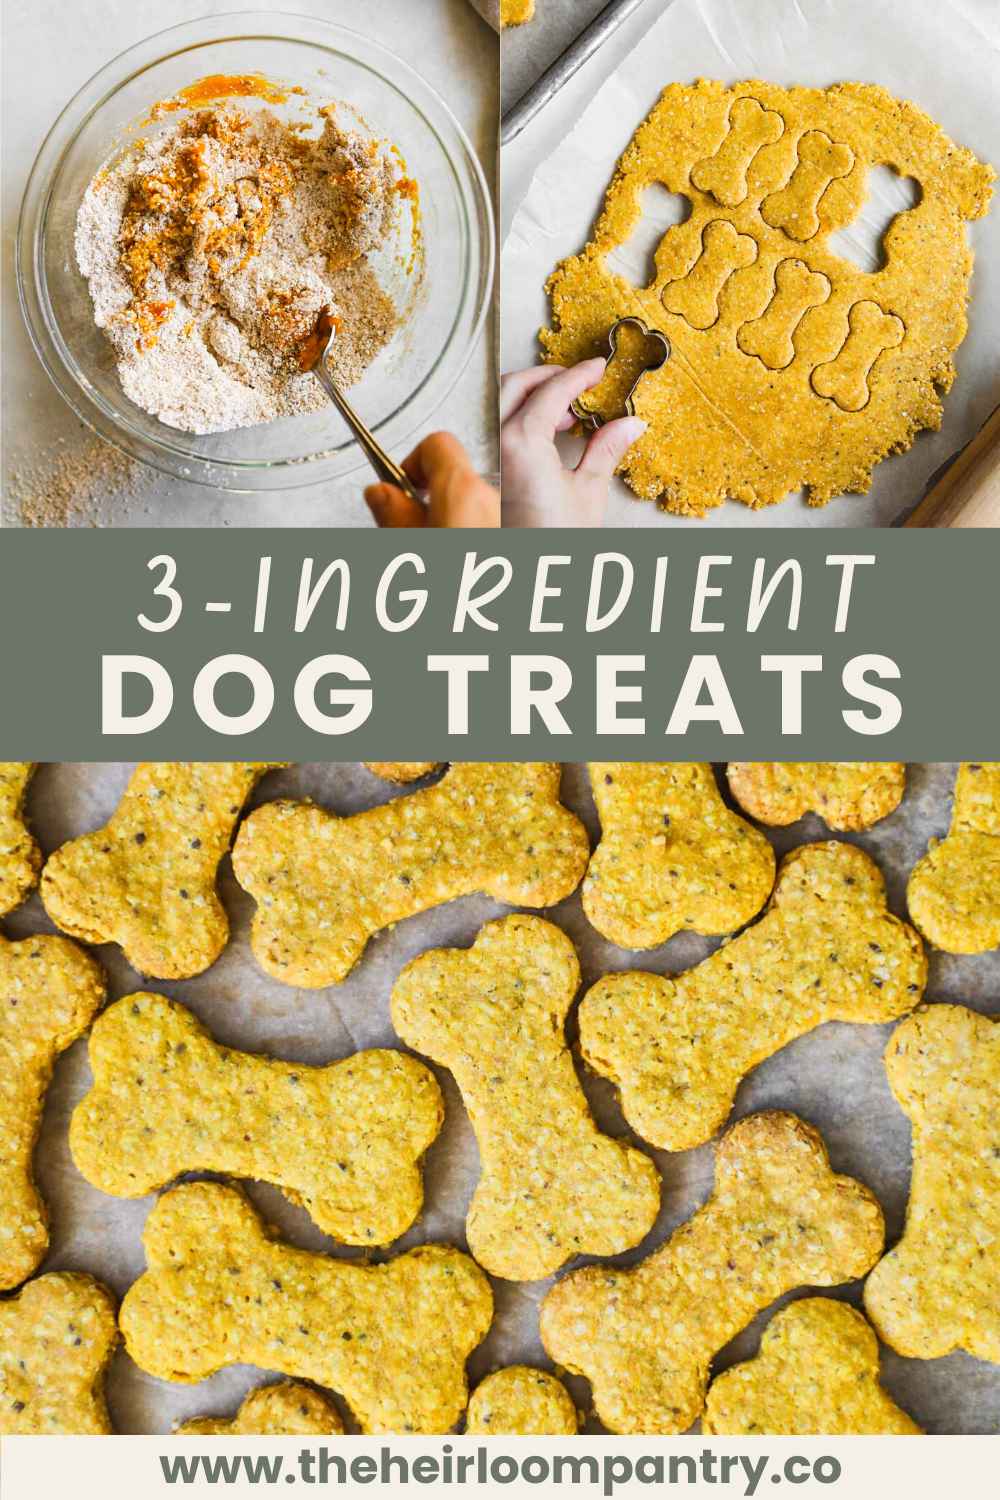 3-ingredient dog treats made with oat flour, pumpkin or sweet potato, and peanut butter Pinterest pin.